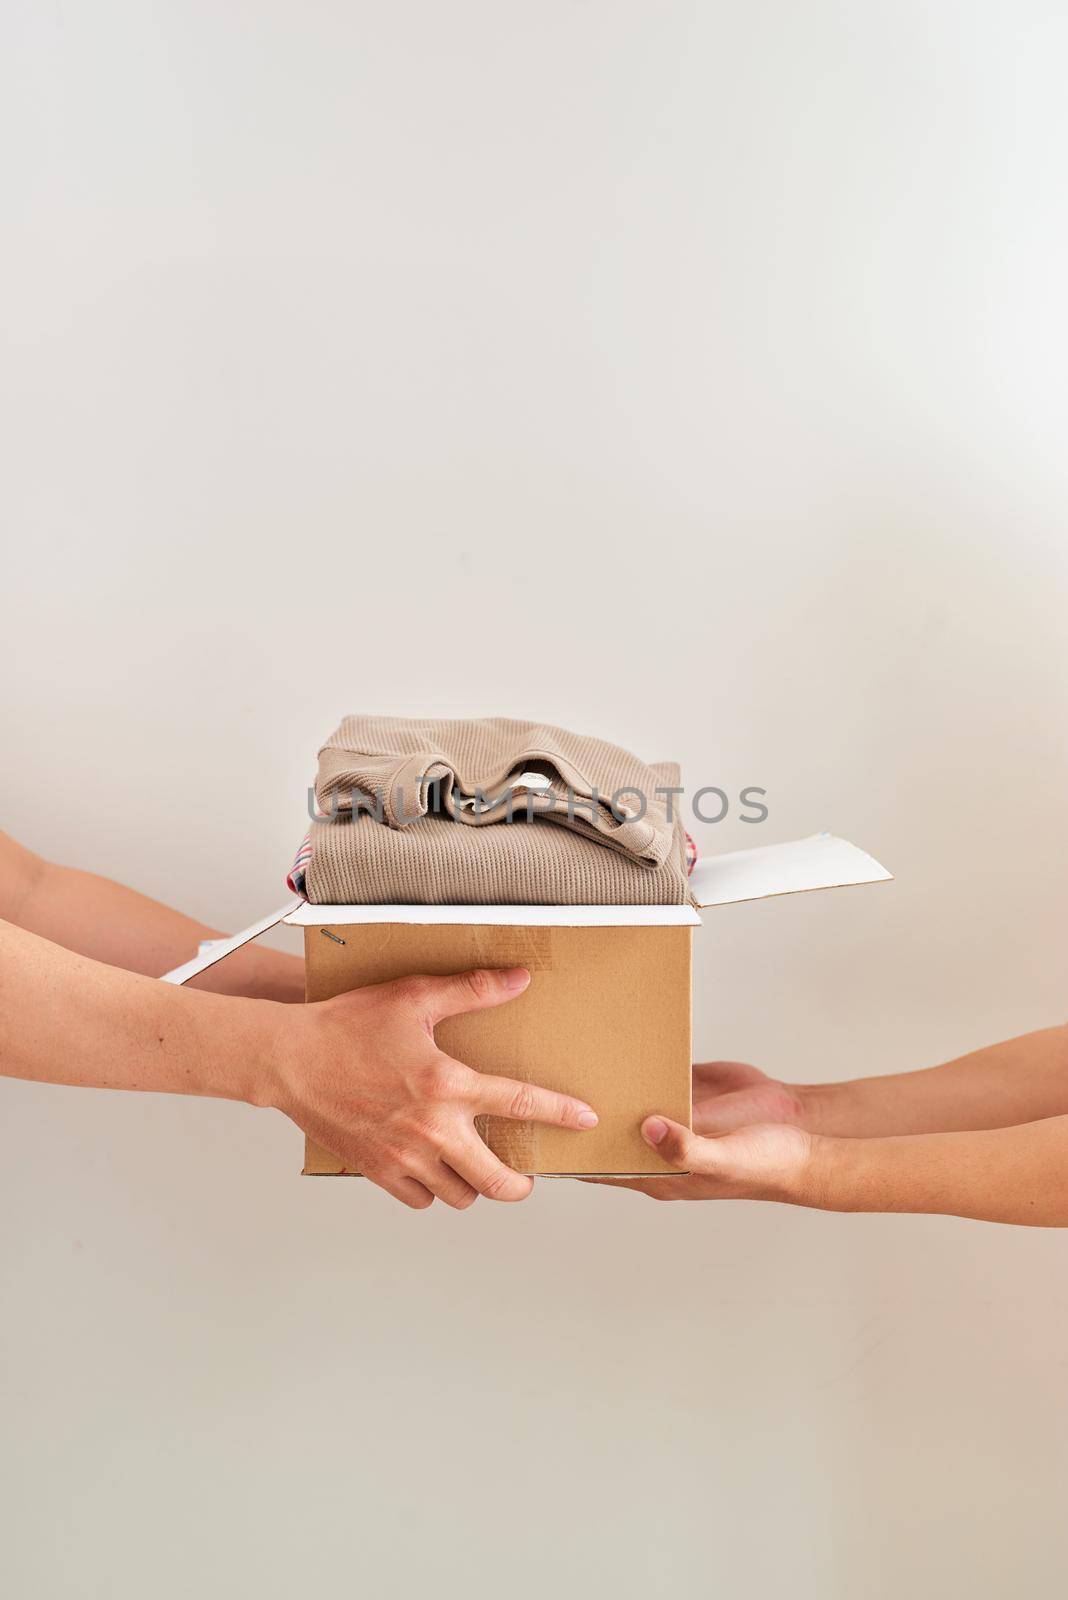 Man holding a clothes donate box. Donation concept.